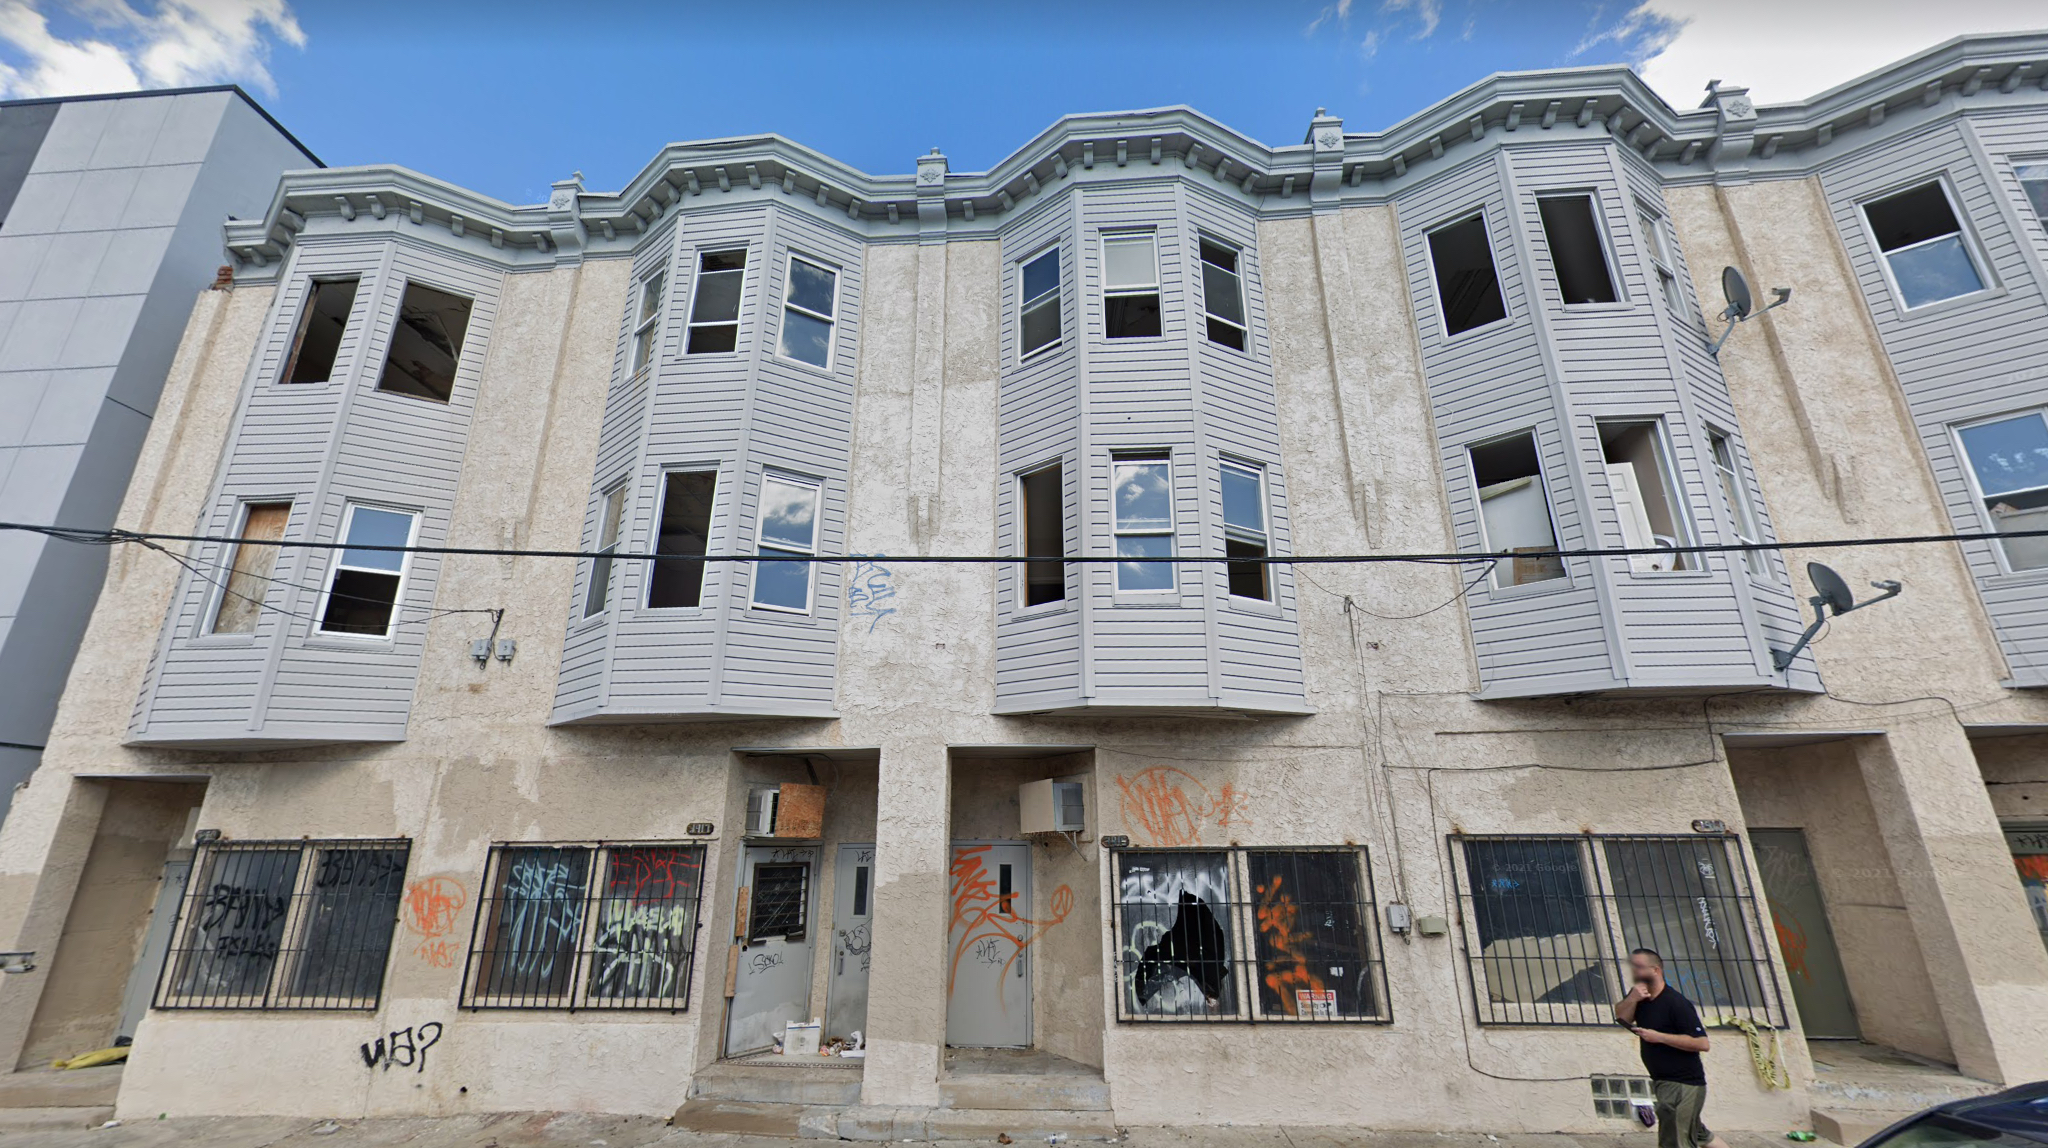 Current view of 3911-19 North 3rd Street. Credit: Google.